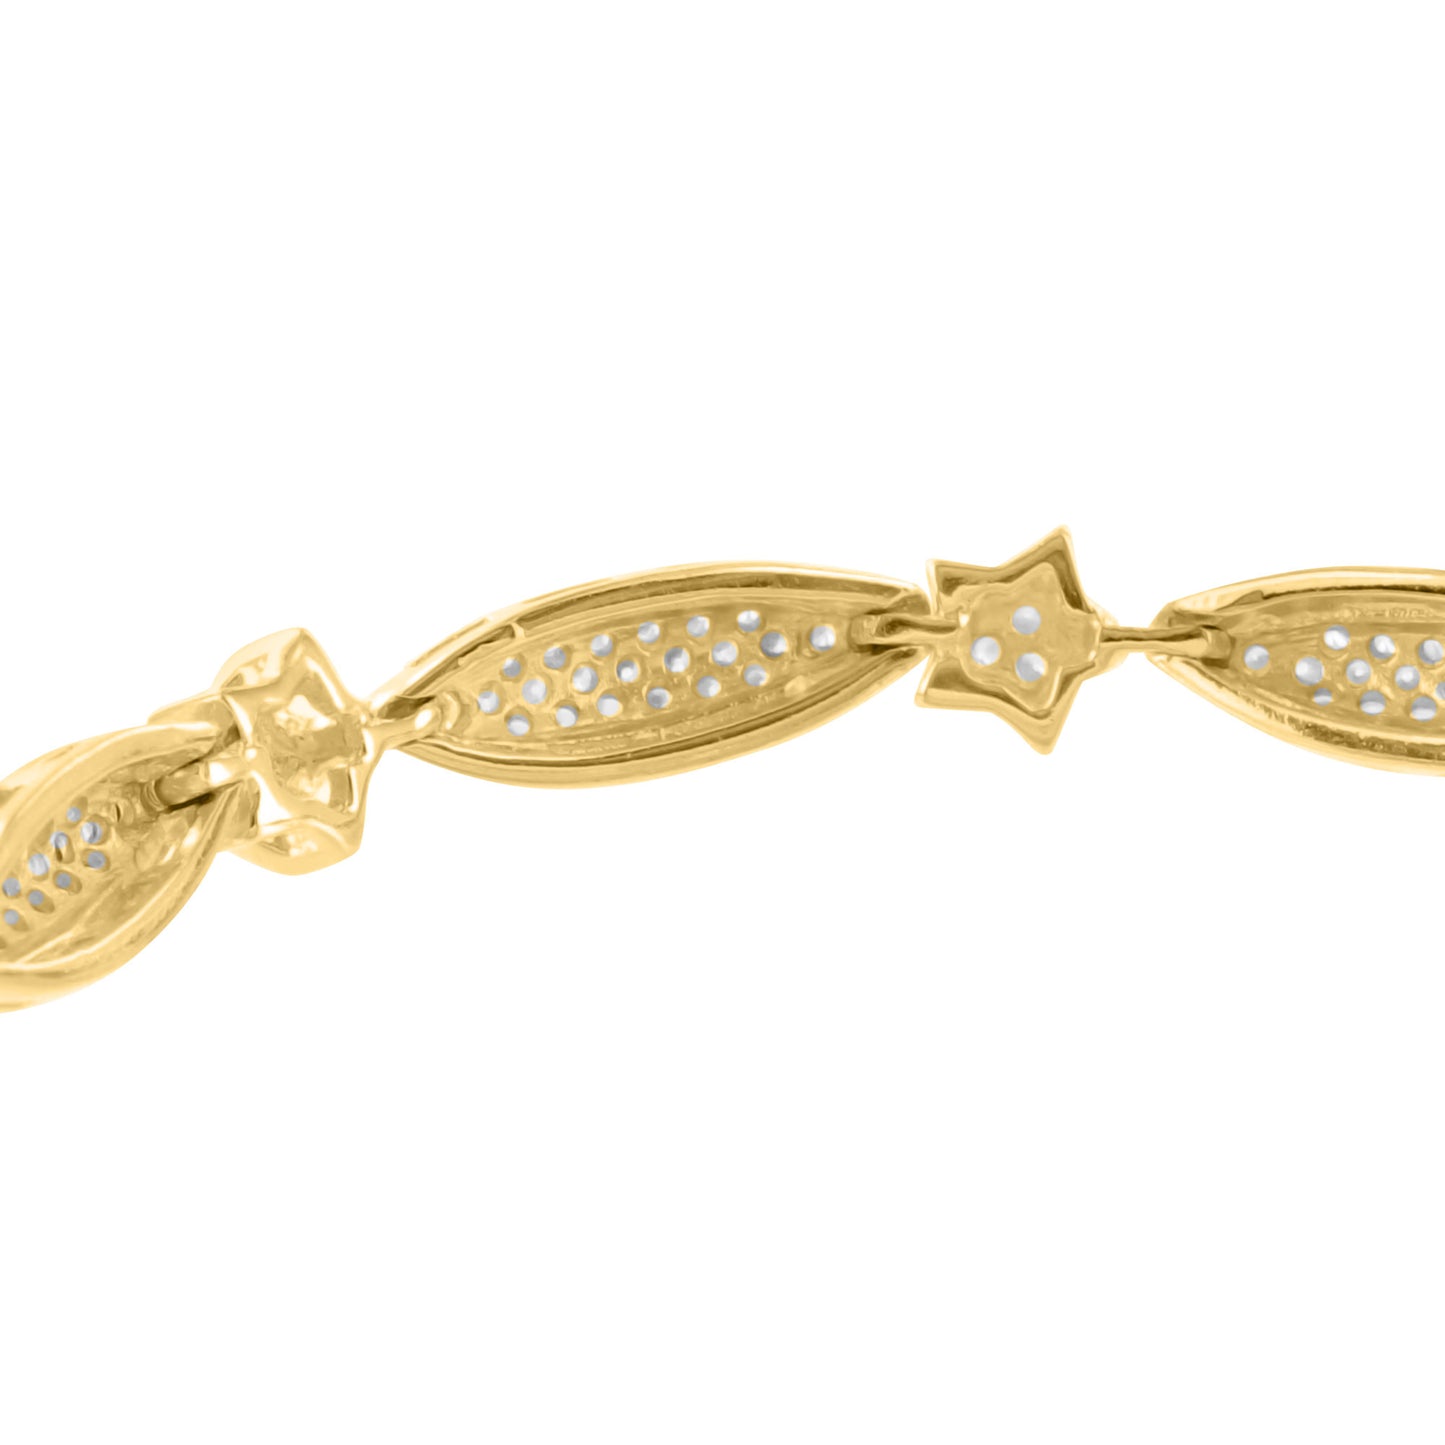 Star Marquise Link Bracelet Gold Finish Simulated Diamonds 925 Silver